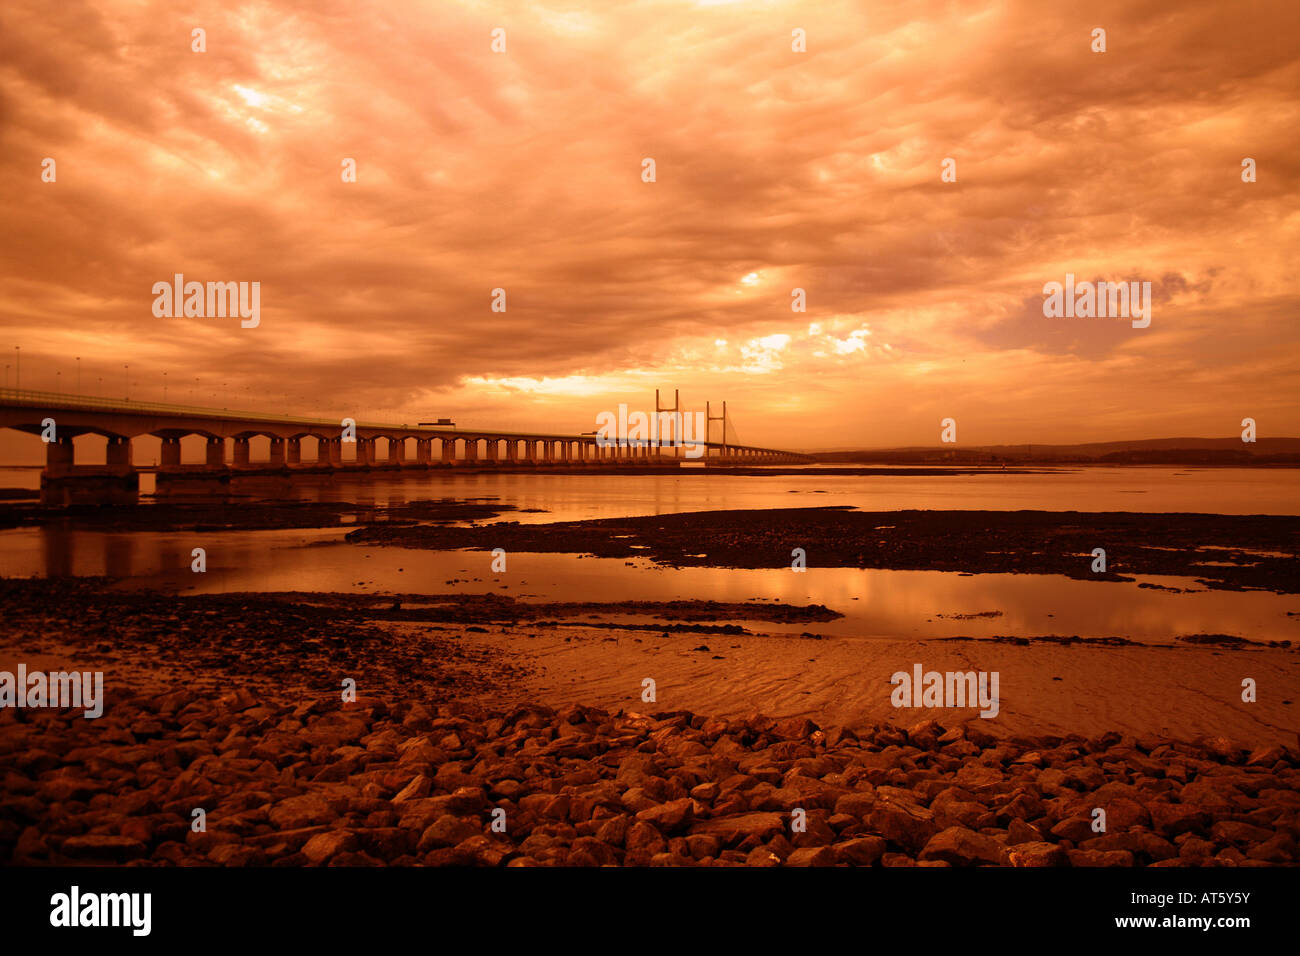 Second Severn Crossing carrying the M4 motorway across the River Severn estuary, looking from England towards Wales Stock Photo